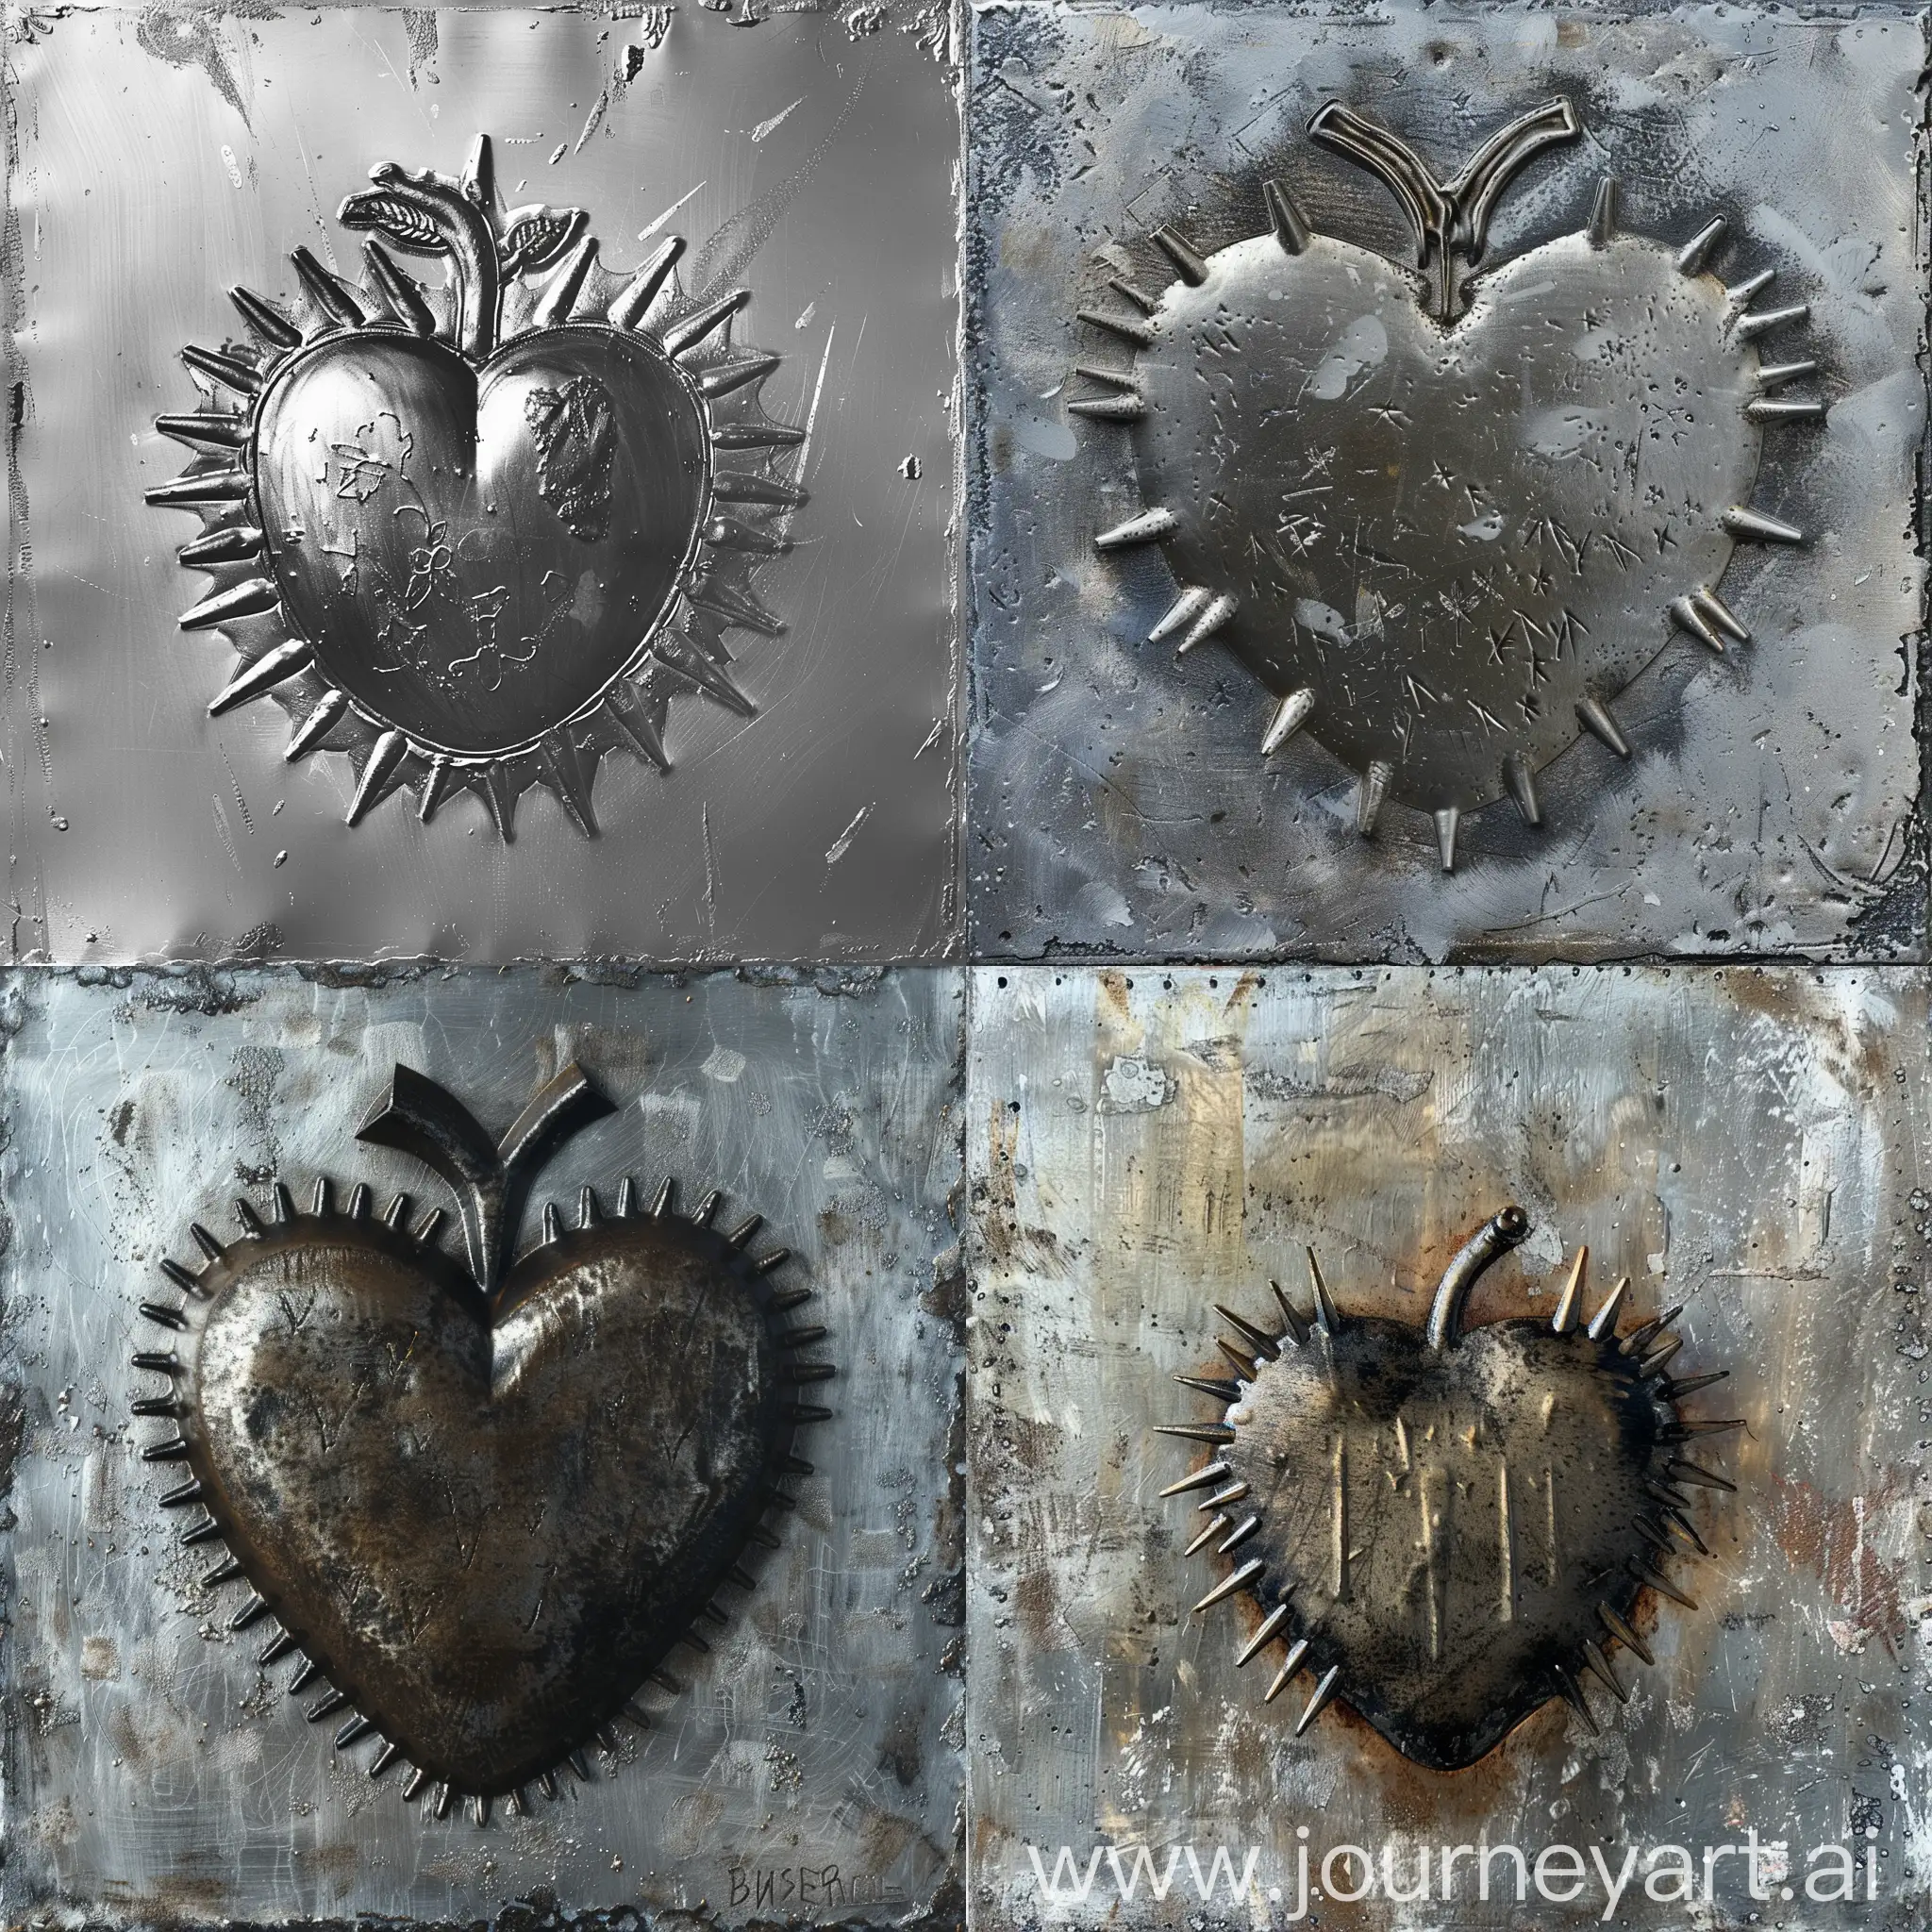 Heartshaped-Apple-with-Spikes-Stencil-on-Metal-Panel